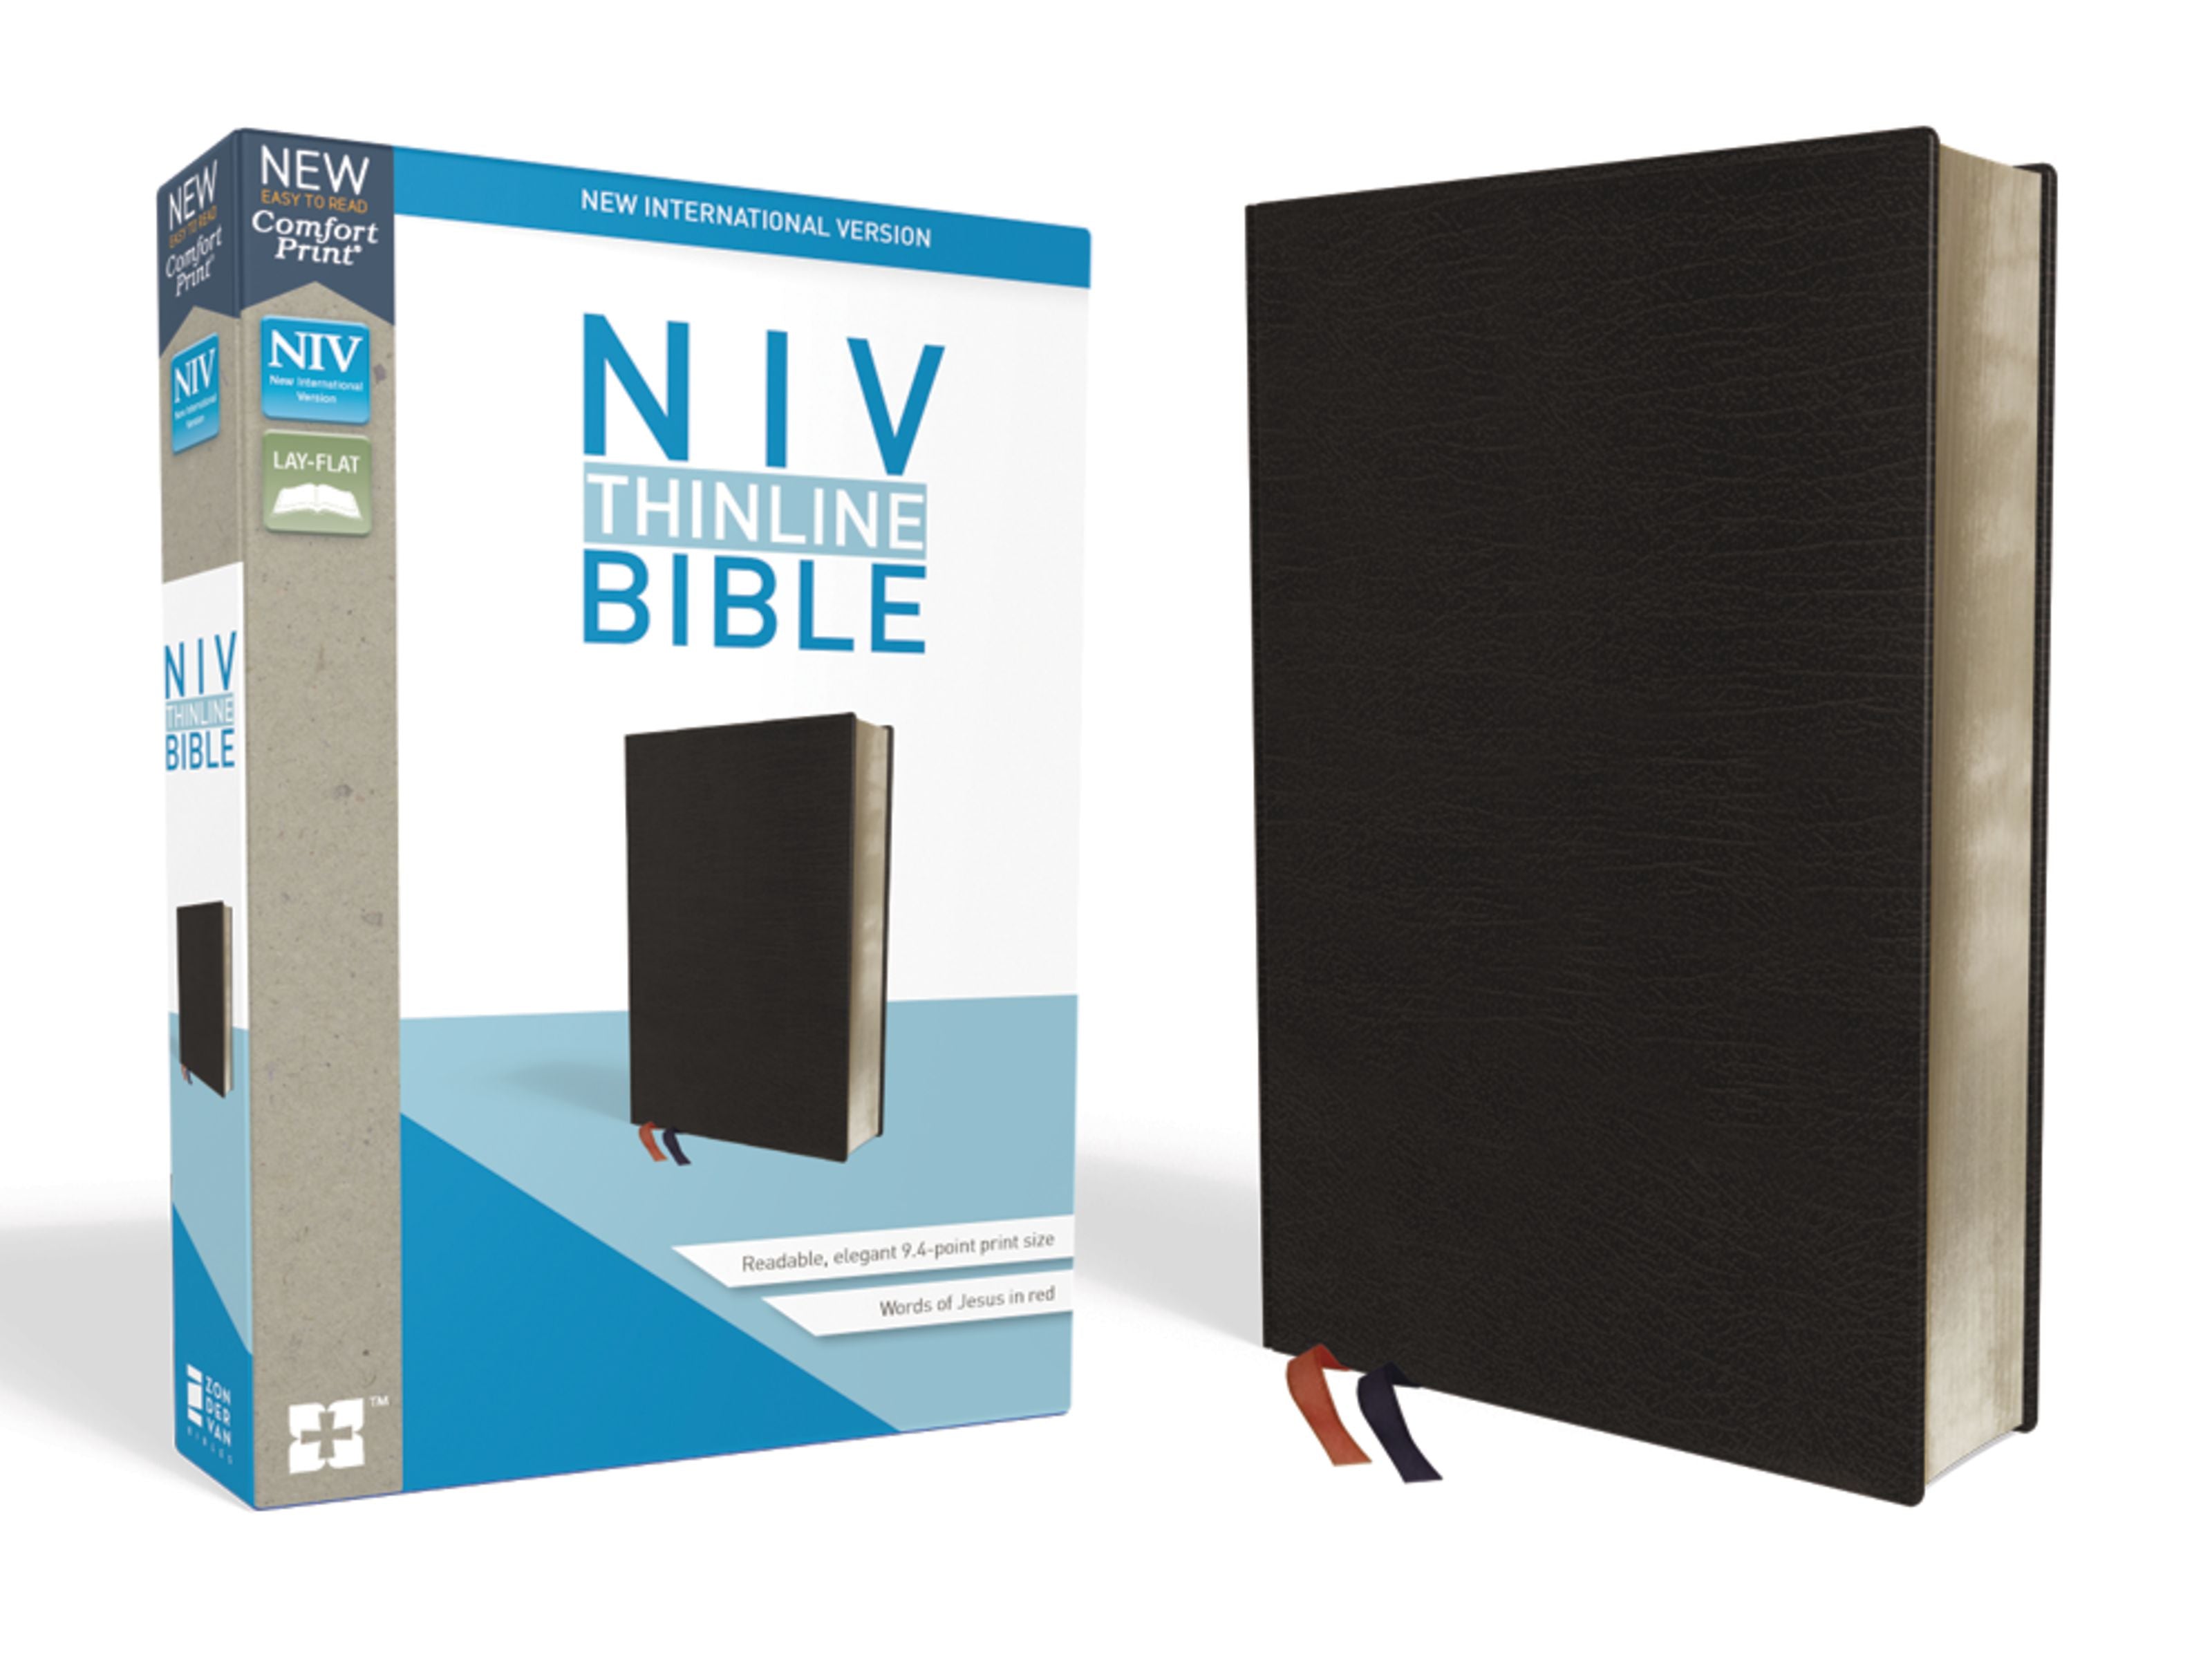 Image of NIV, Thinline Bible, Bonded Leather, Black, Red Letter Edition other